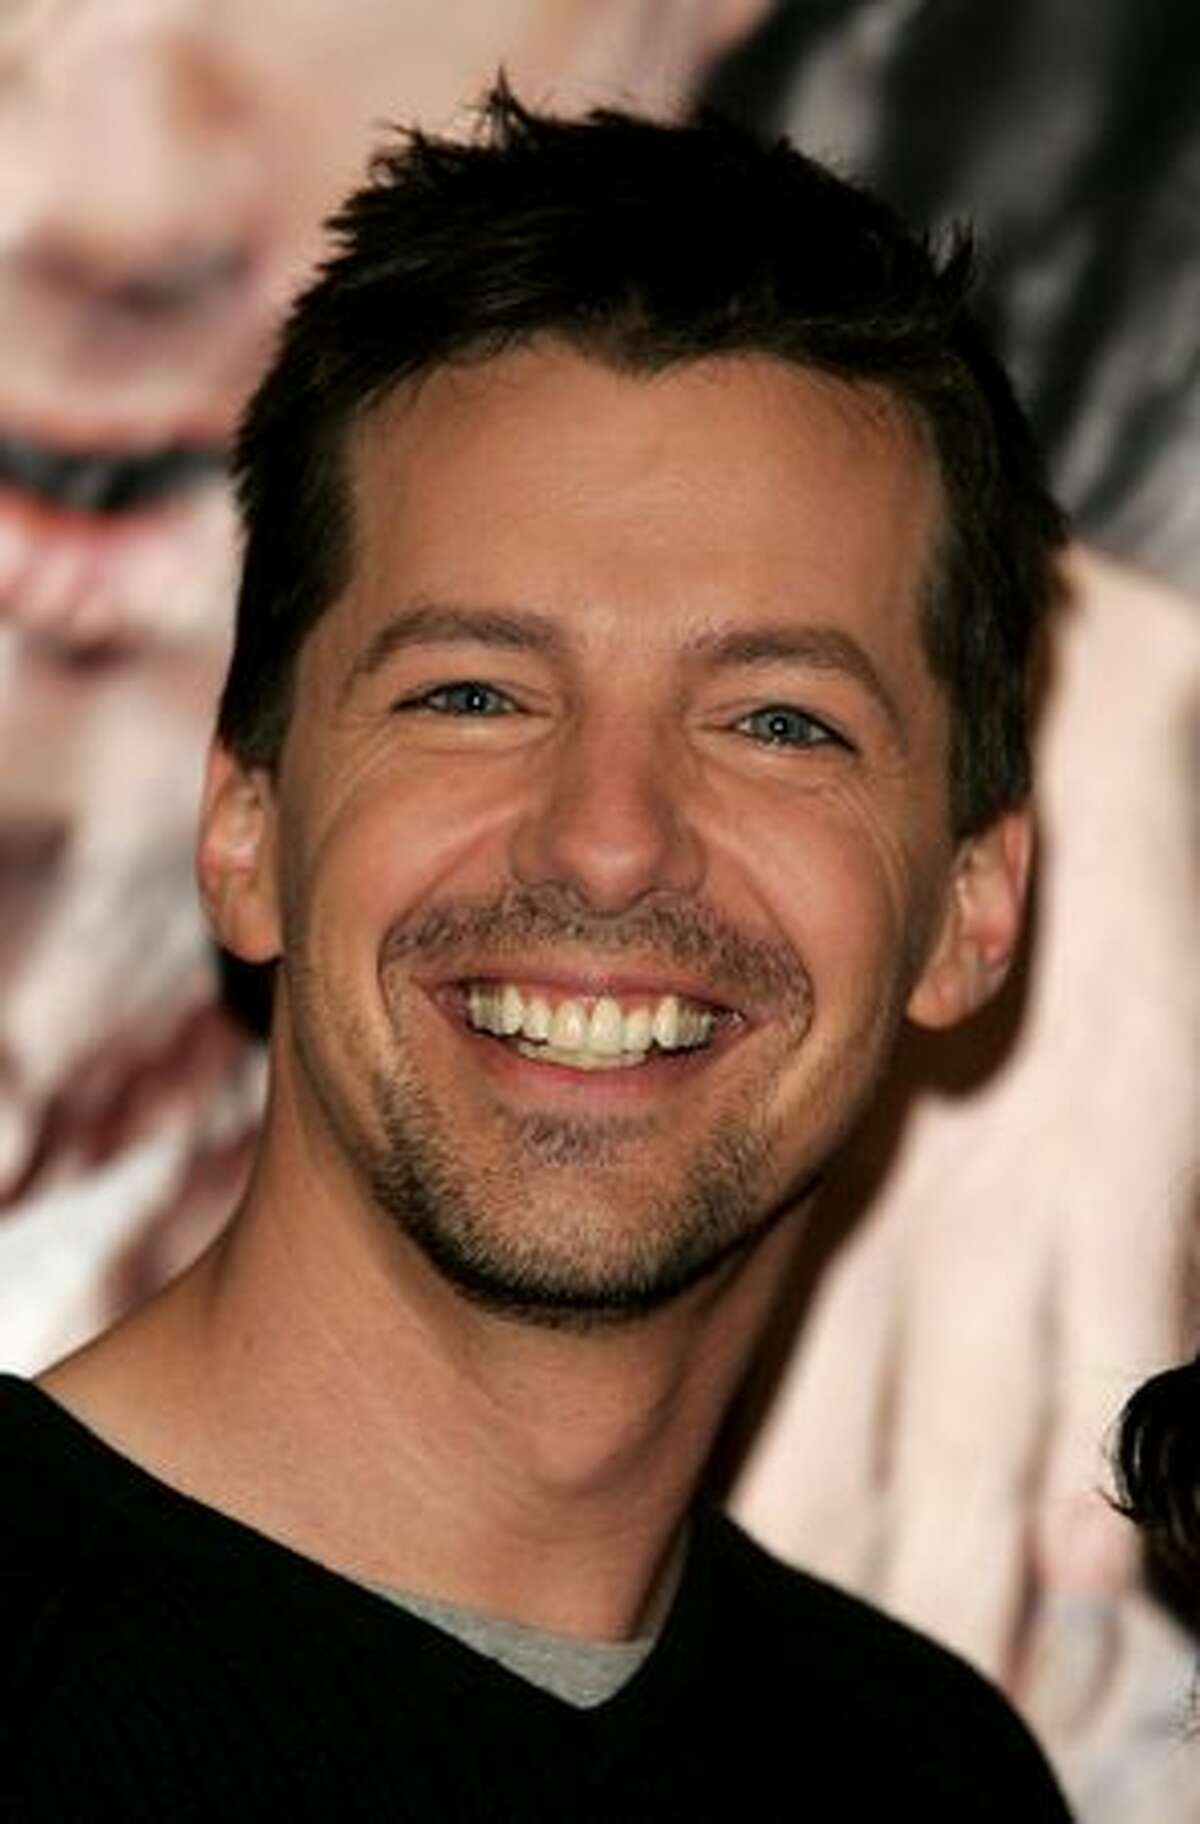 Sean Hayes: After refusing several interviews with gay news magazine The Advocate and purposefully avoiding questions about his sexuality in other interviews, the ‘Will & Grace’ star came out publicly in March, telling The Advocate "I am who I am. I was never in, as they say. Never. I believe that nobody owes anything to anybody.” (Photo by Peter Kramer/Getty Images)